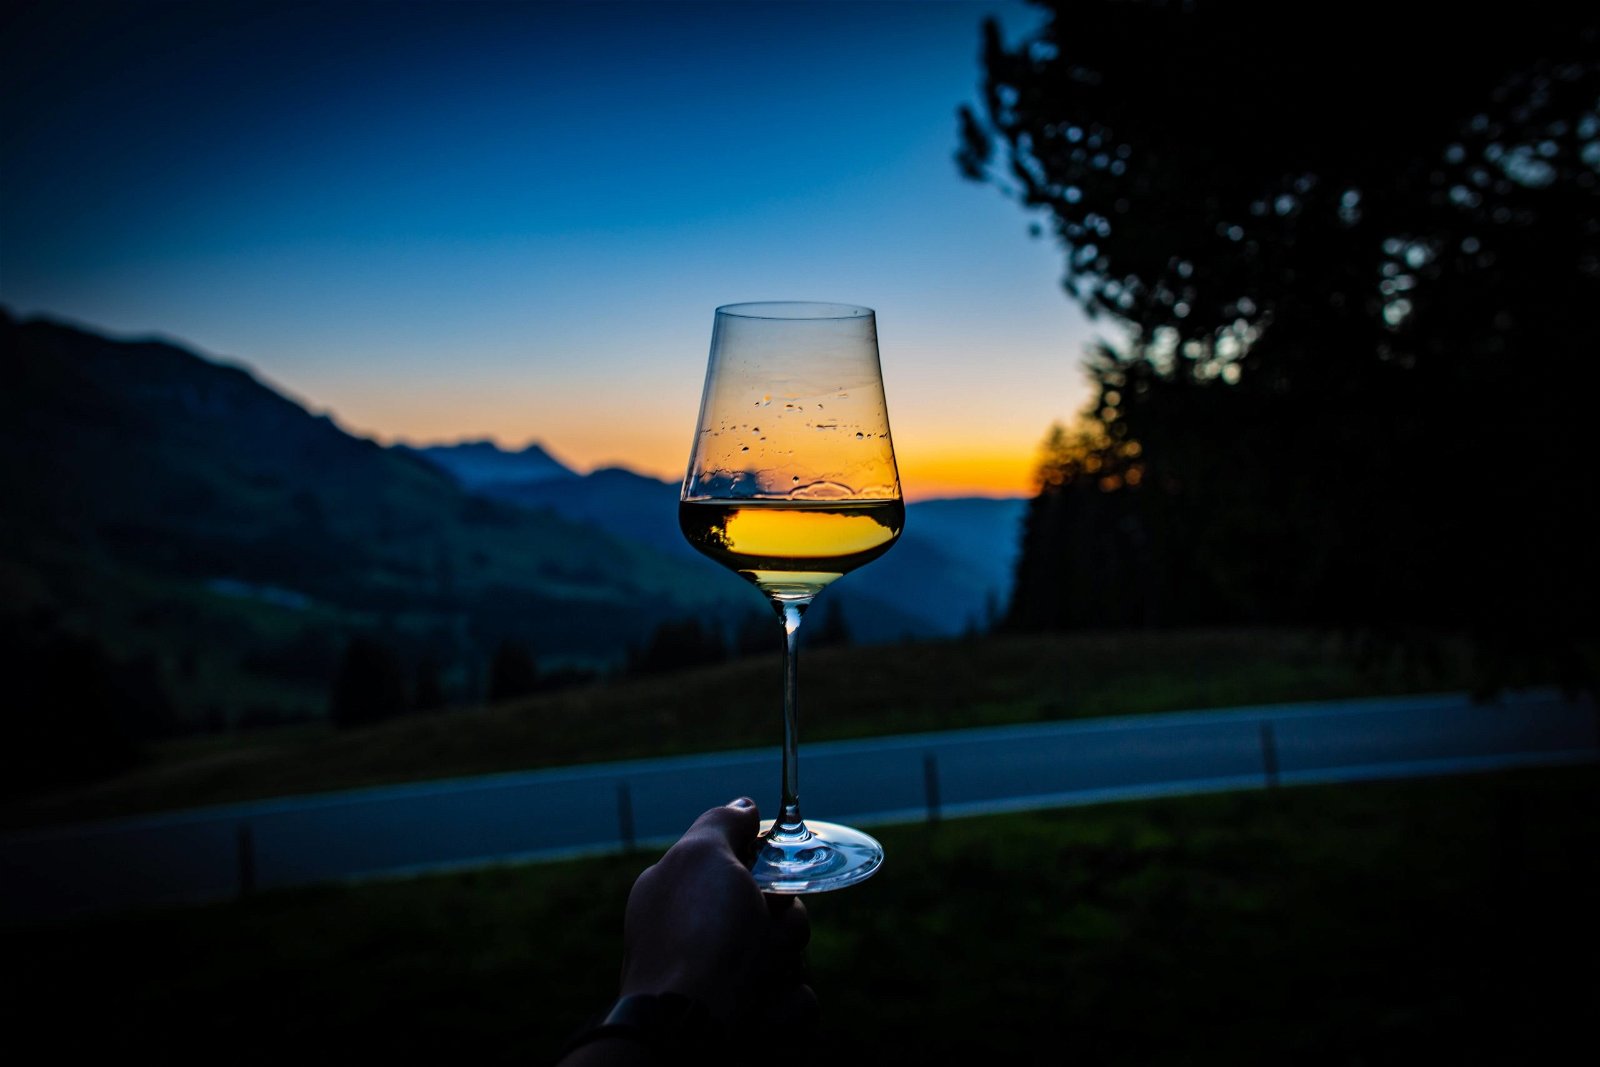 Backlighting really enhances the liquid property of foods such as soup and beverages as seen in this image of a glass of wine